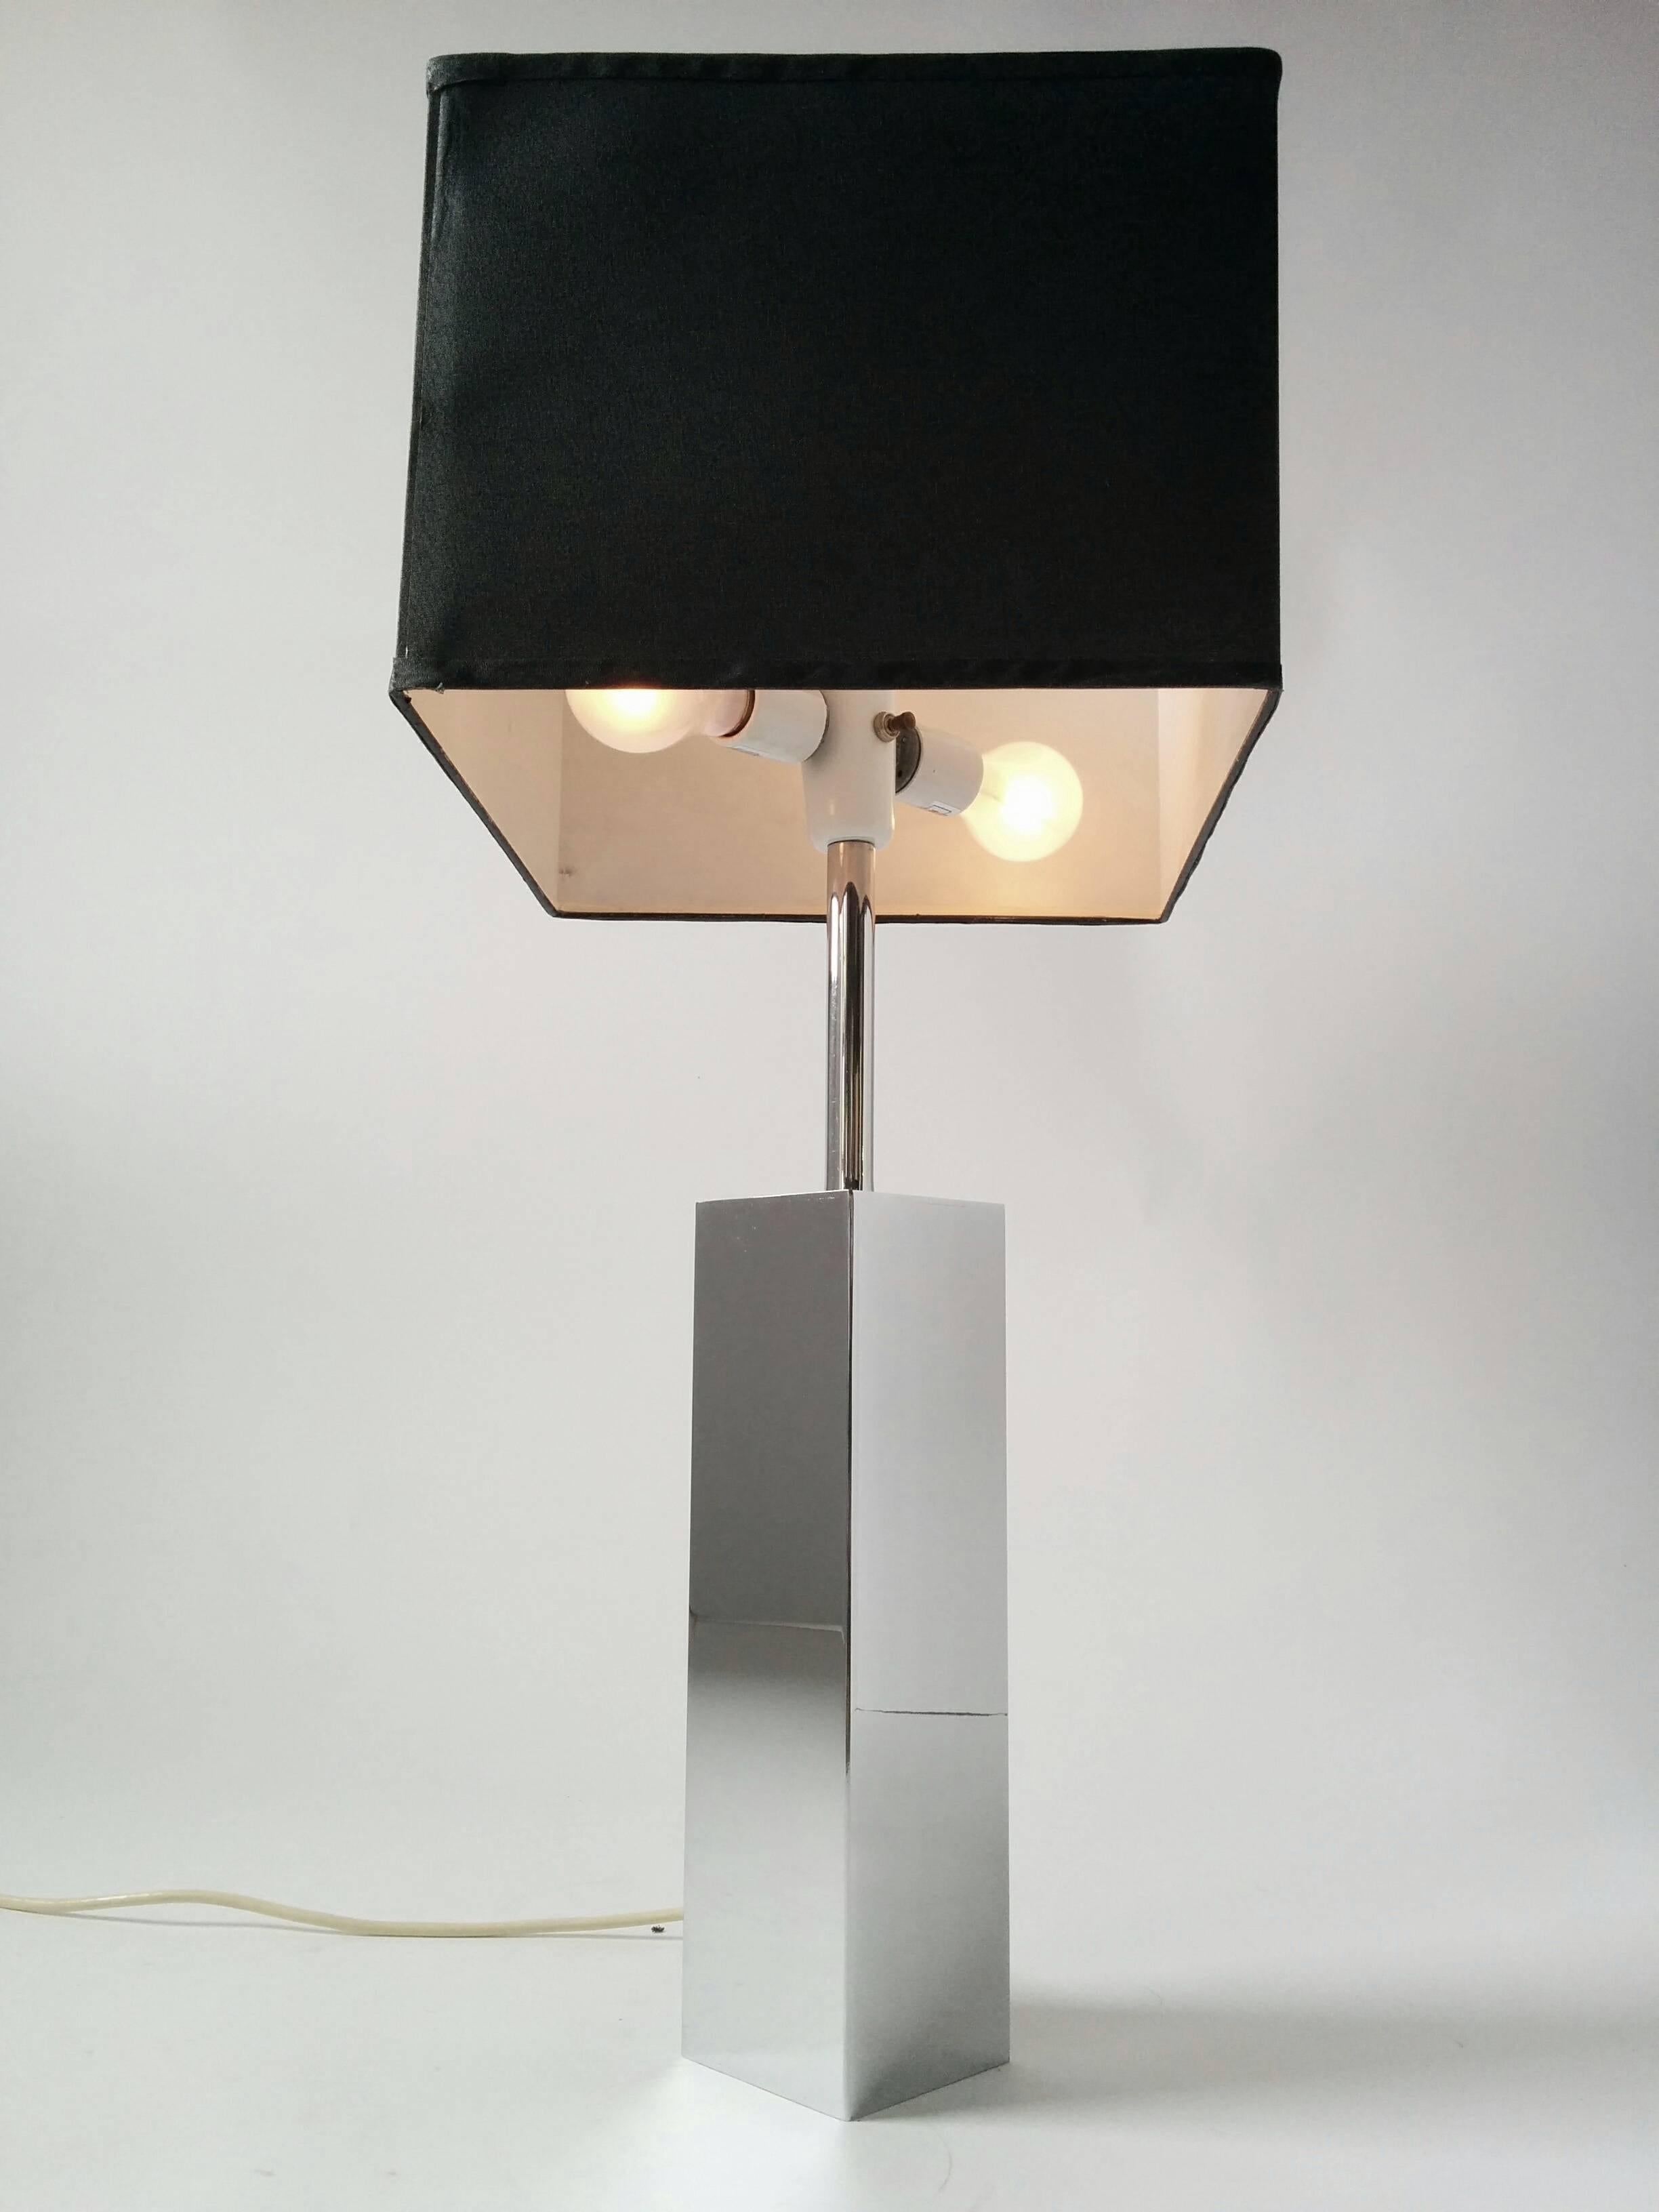 Minimalist heavyweight table lamps from Goffredo Reggiani.

Signed items.

Measure: 25 inches high without the shade.

Weight 9 pounds each.

Three ceramic E26 North American sockets rated at a 60 watts each, controled individualy by a rotating